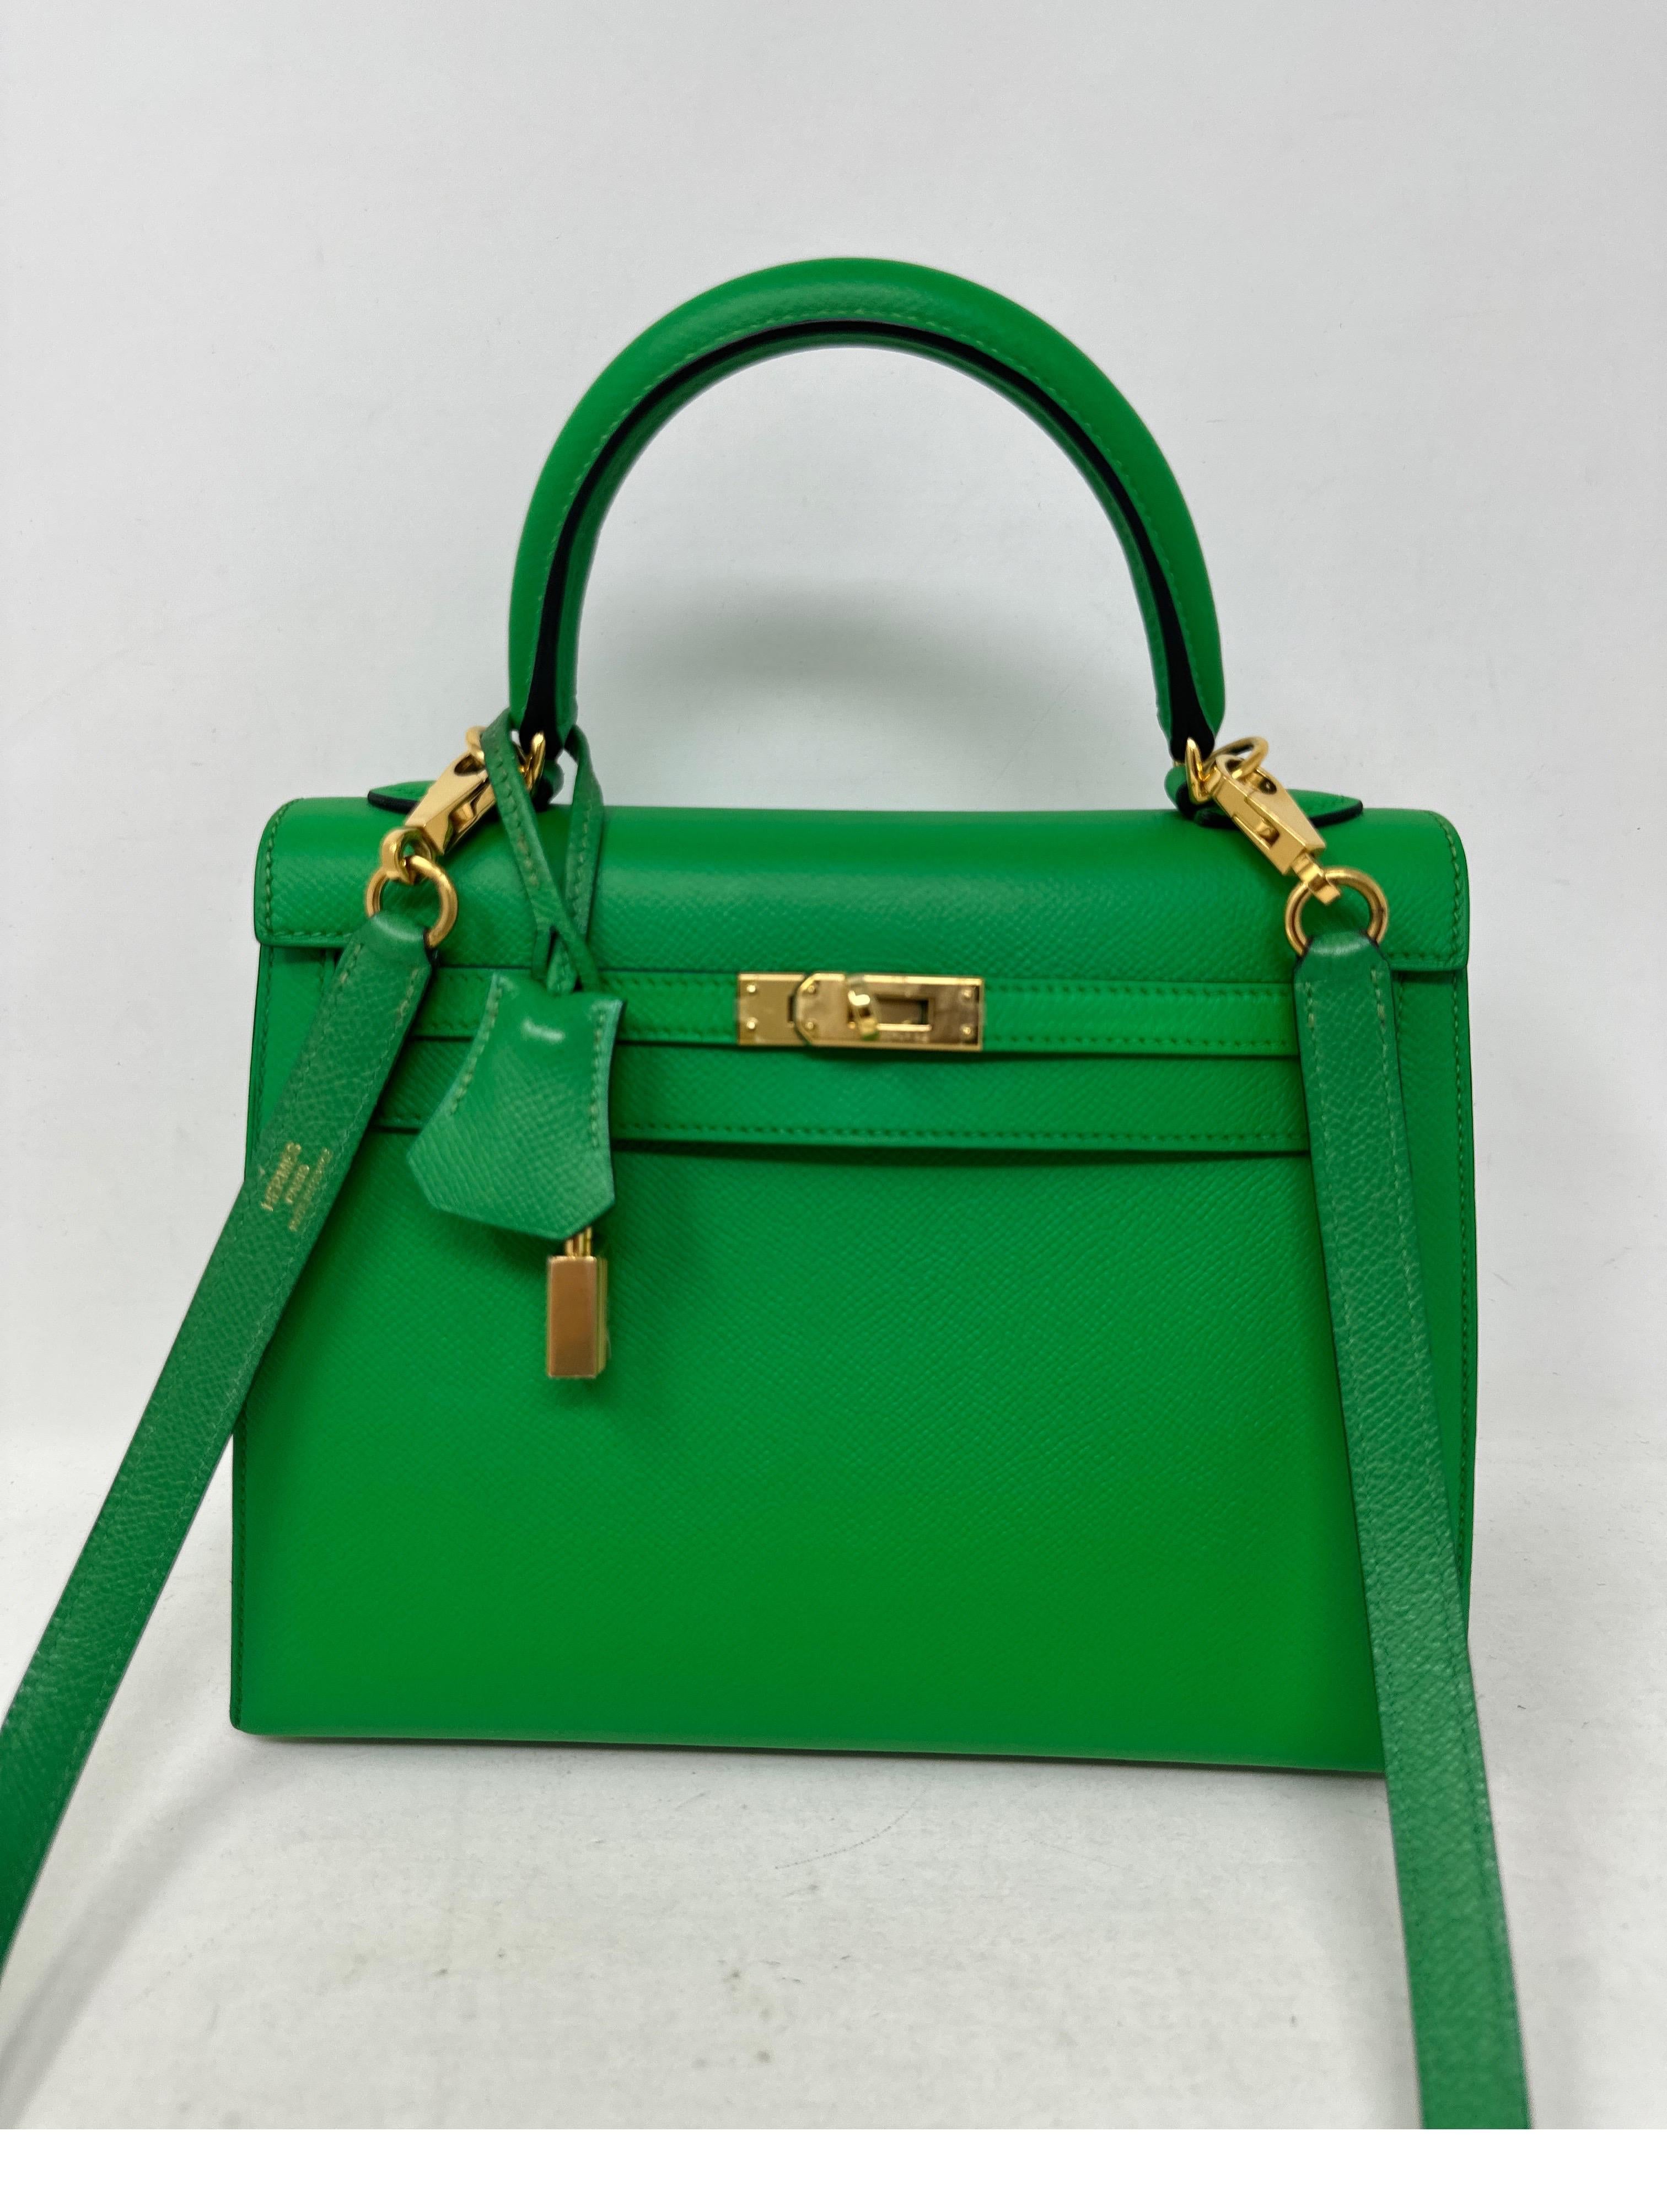 Replica Hermes Kelly Retourne 28 Handmade Bag In Jaune Ambre Clemence  Leather